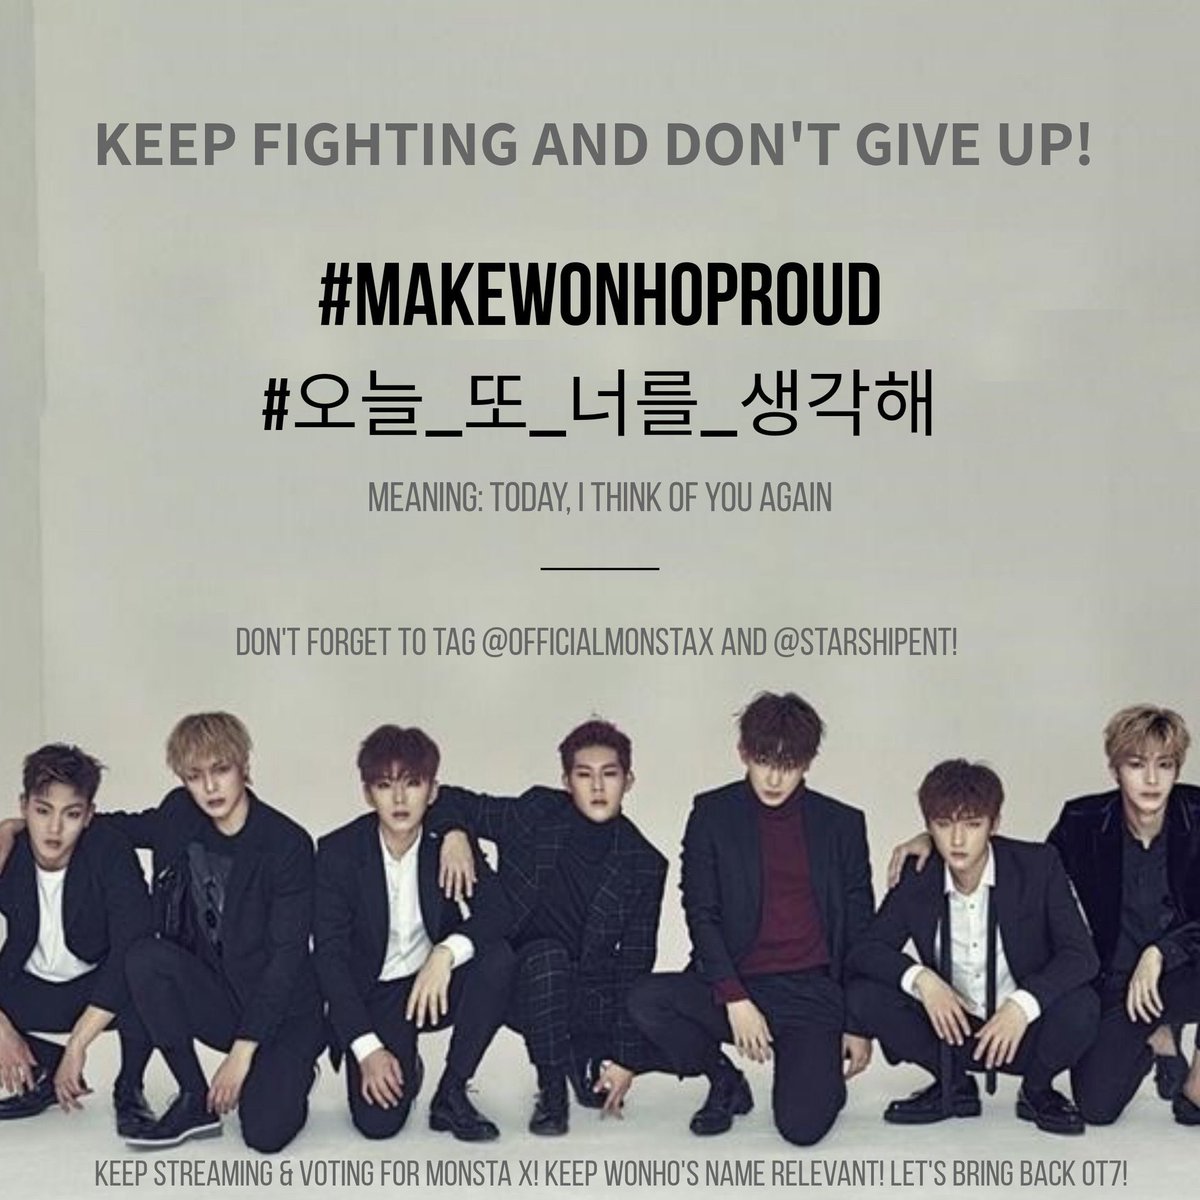 2020031112pm KST onwards245th Hashtags @OfficialMonstaX  @STARSHIPent  #MakeWonhoProud #오늘_또_너를_생각해 483 official protest Hashtags